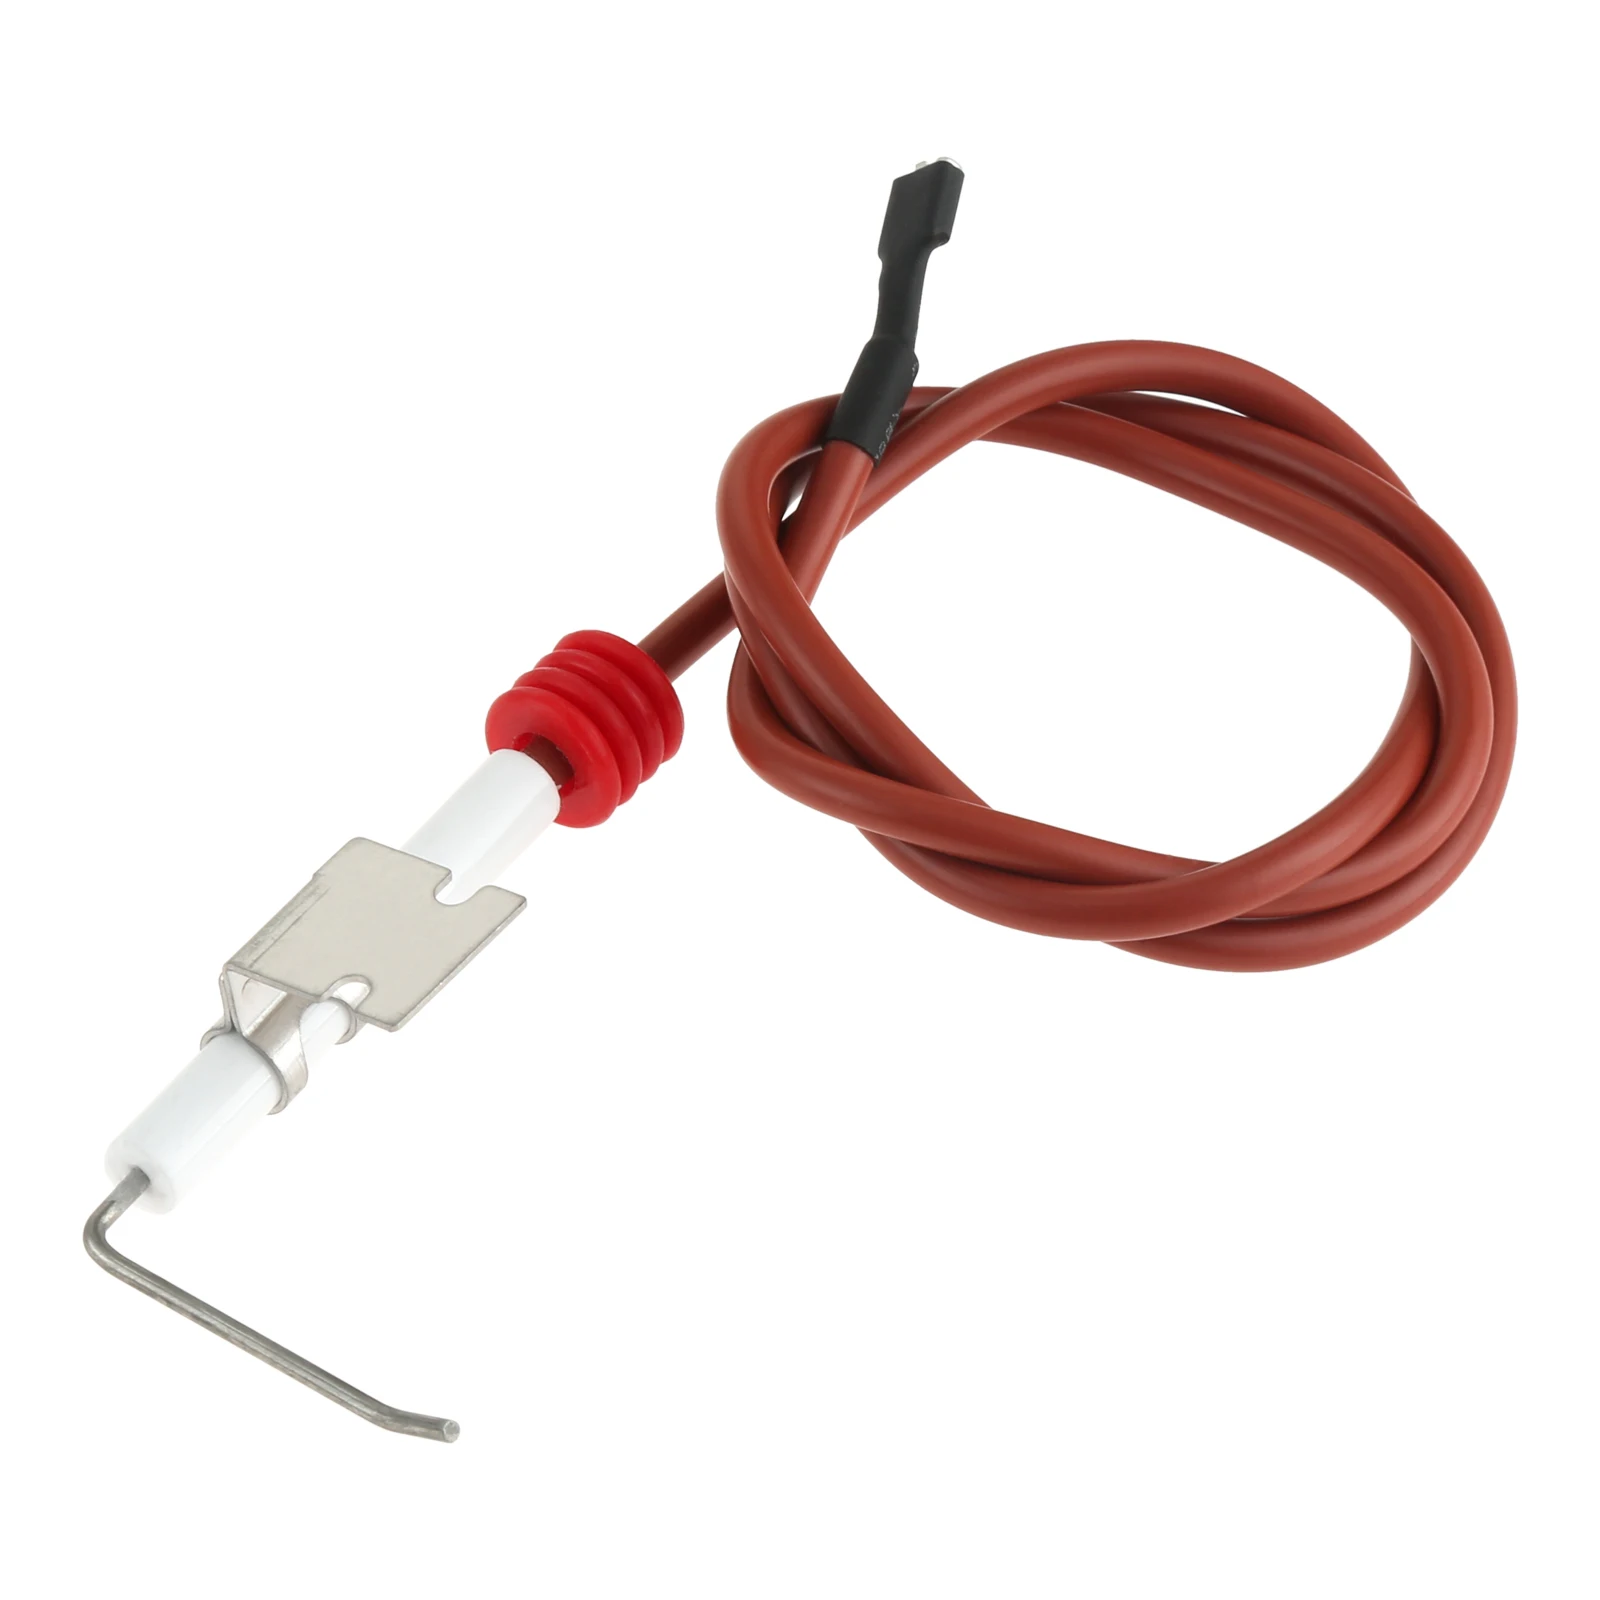 

232286 Electrode Single Probe Igniter Electrode with Wire Assembly for Suburban Furnaces Length 27.5" Easy To Install Durable